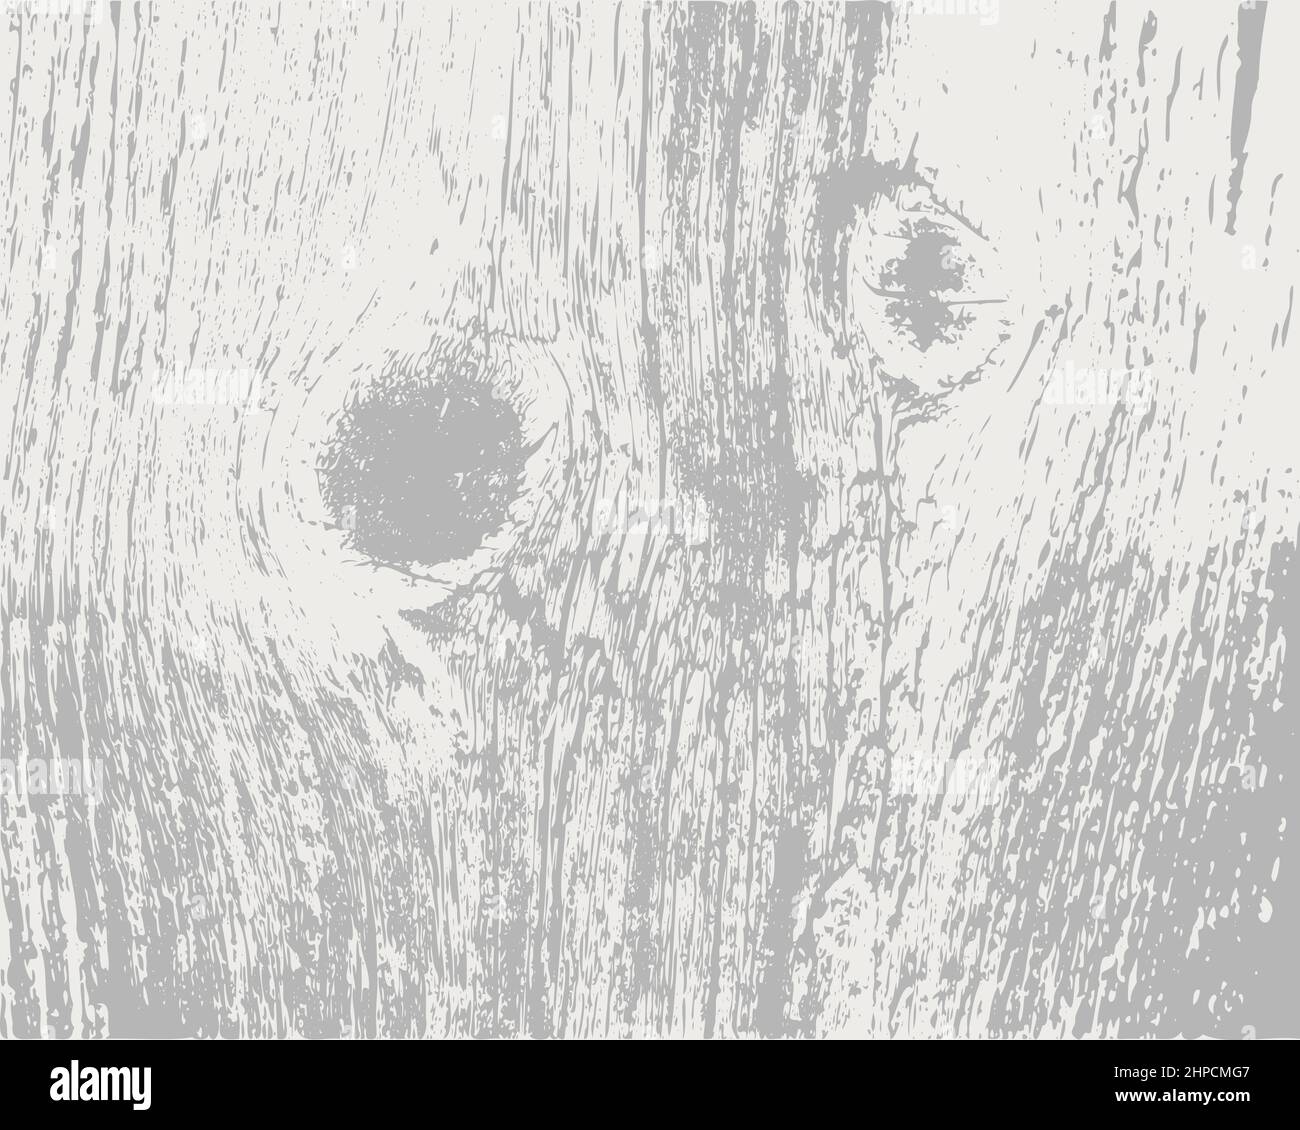 Wooden background. Abstract pattern with wooden surface. Wood grain texture. Vector texture. Gray background. Stock Vector